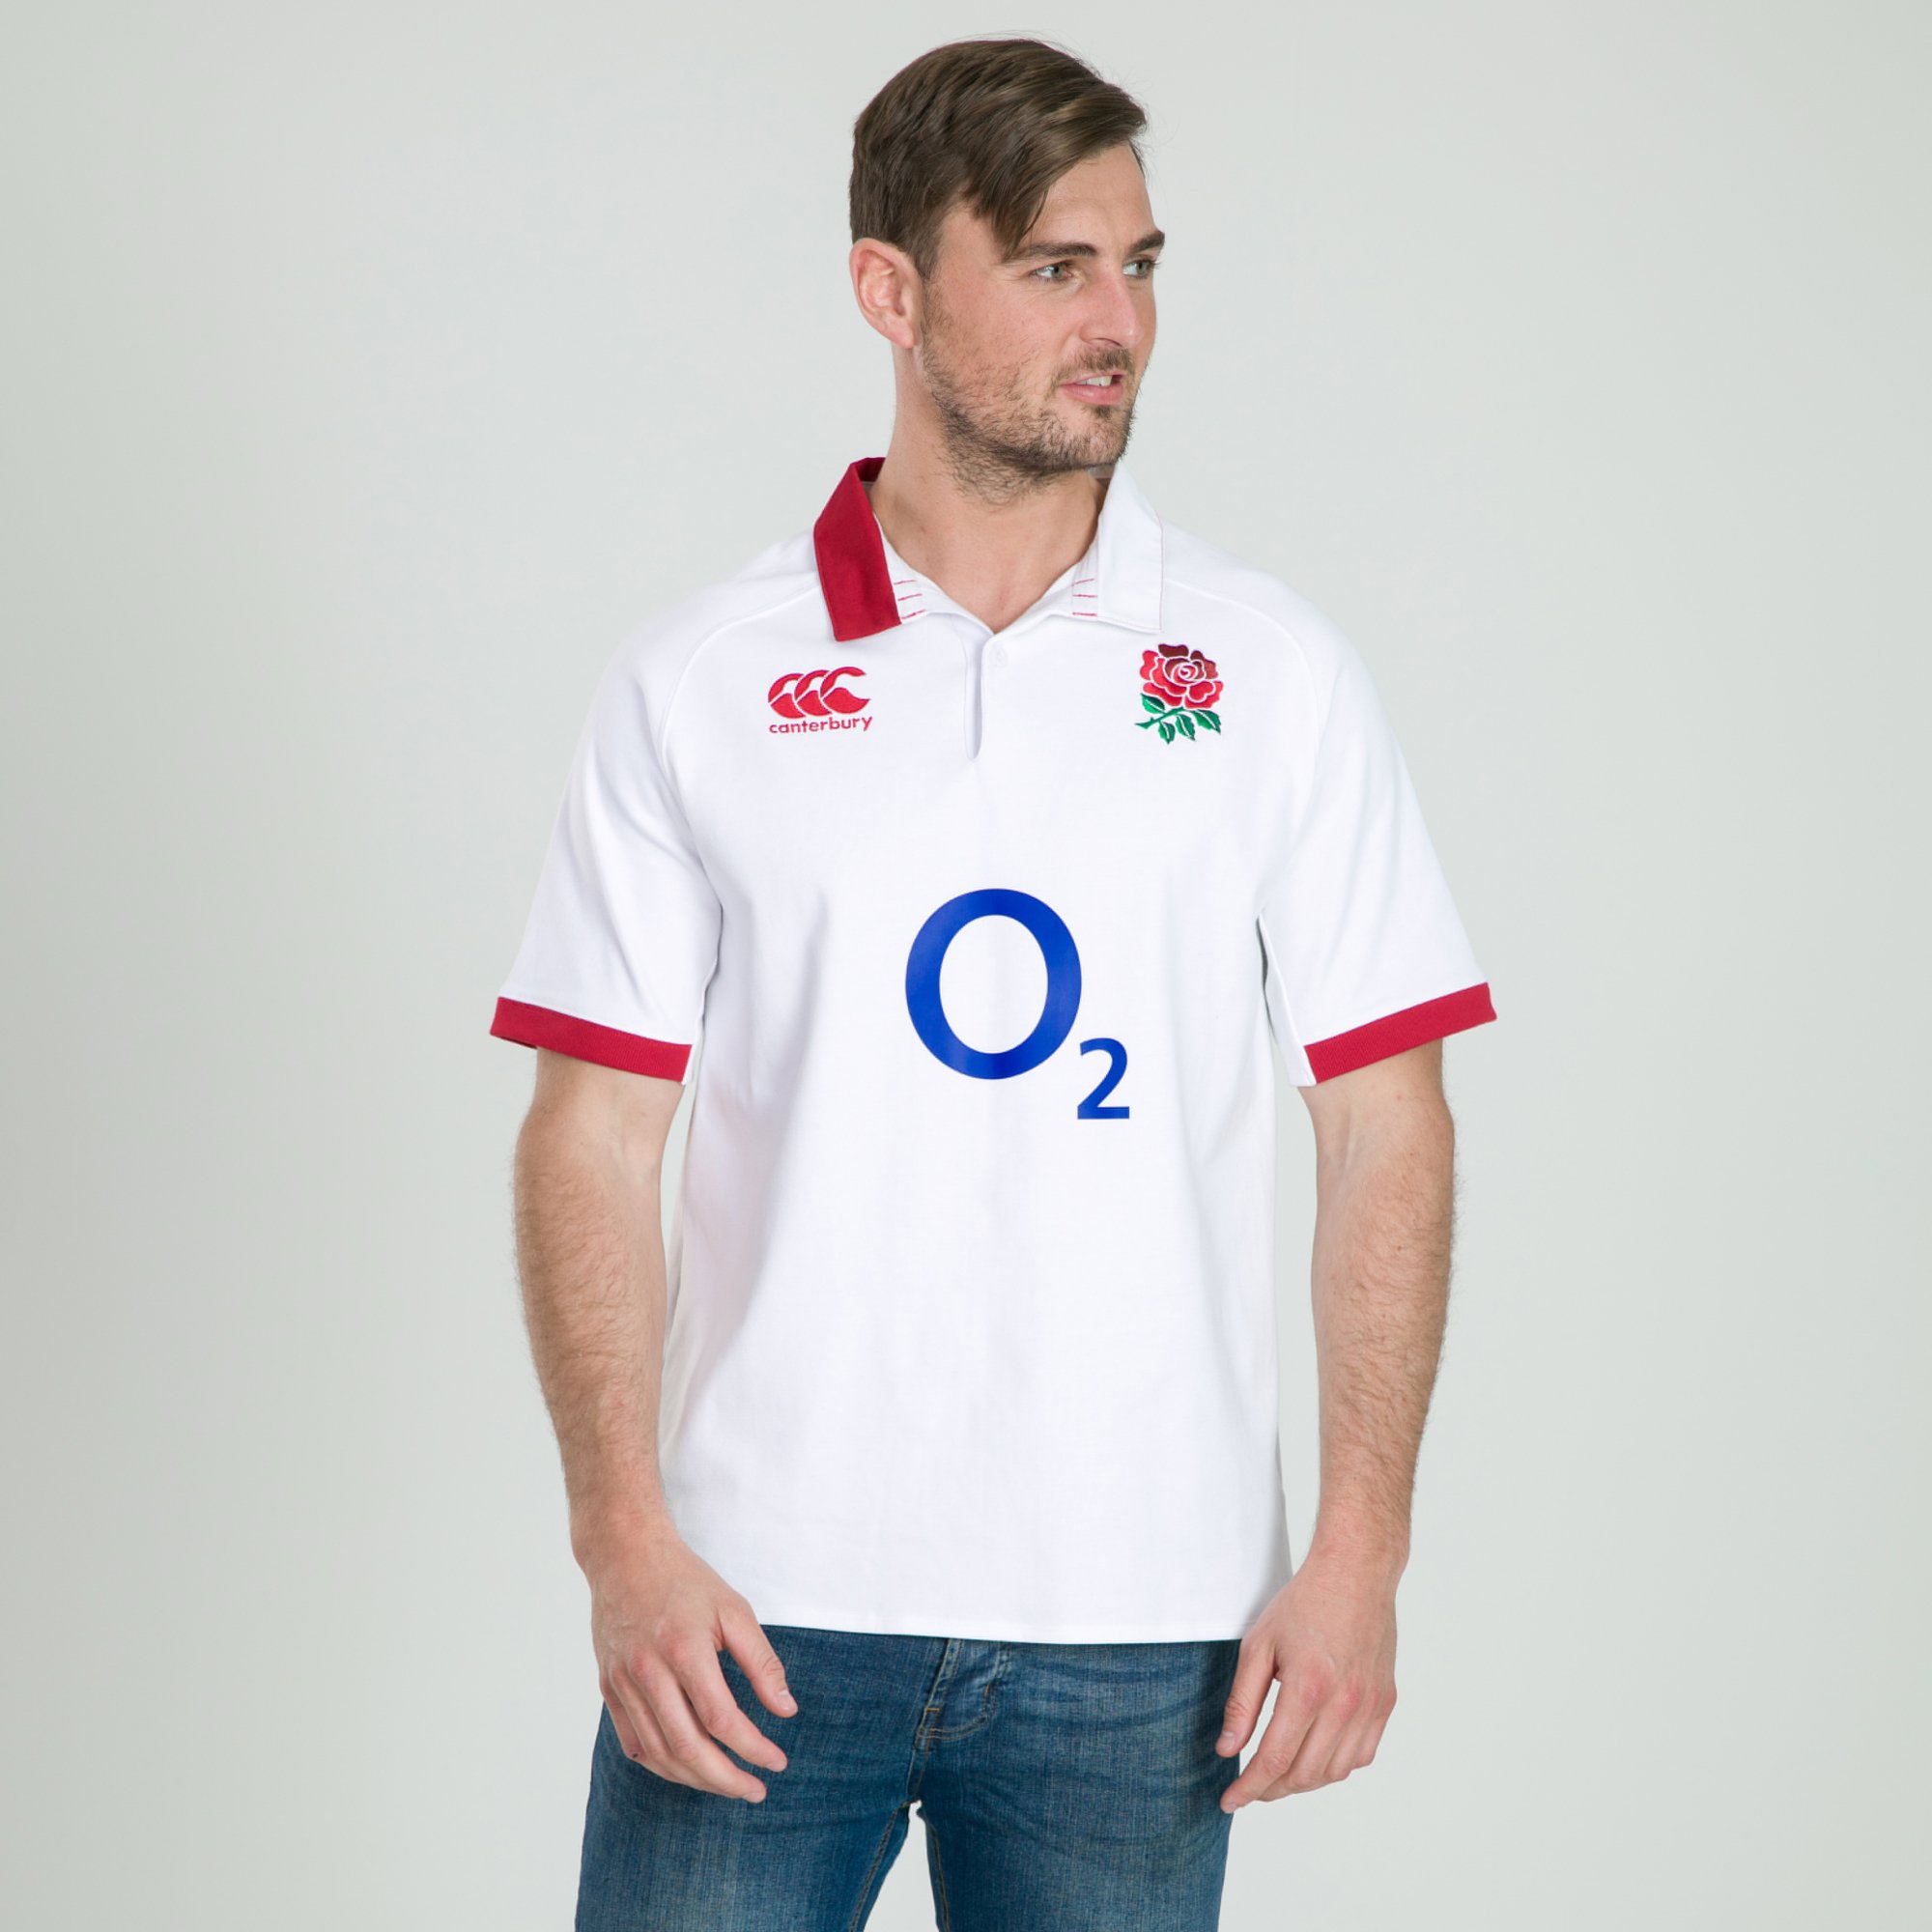 Man in England jersey